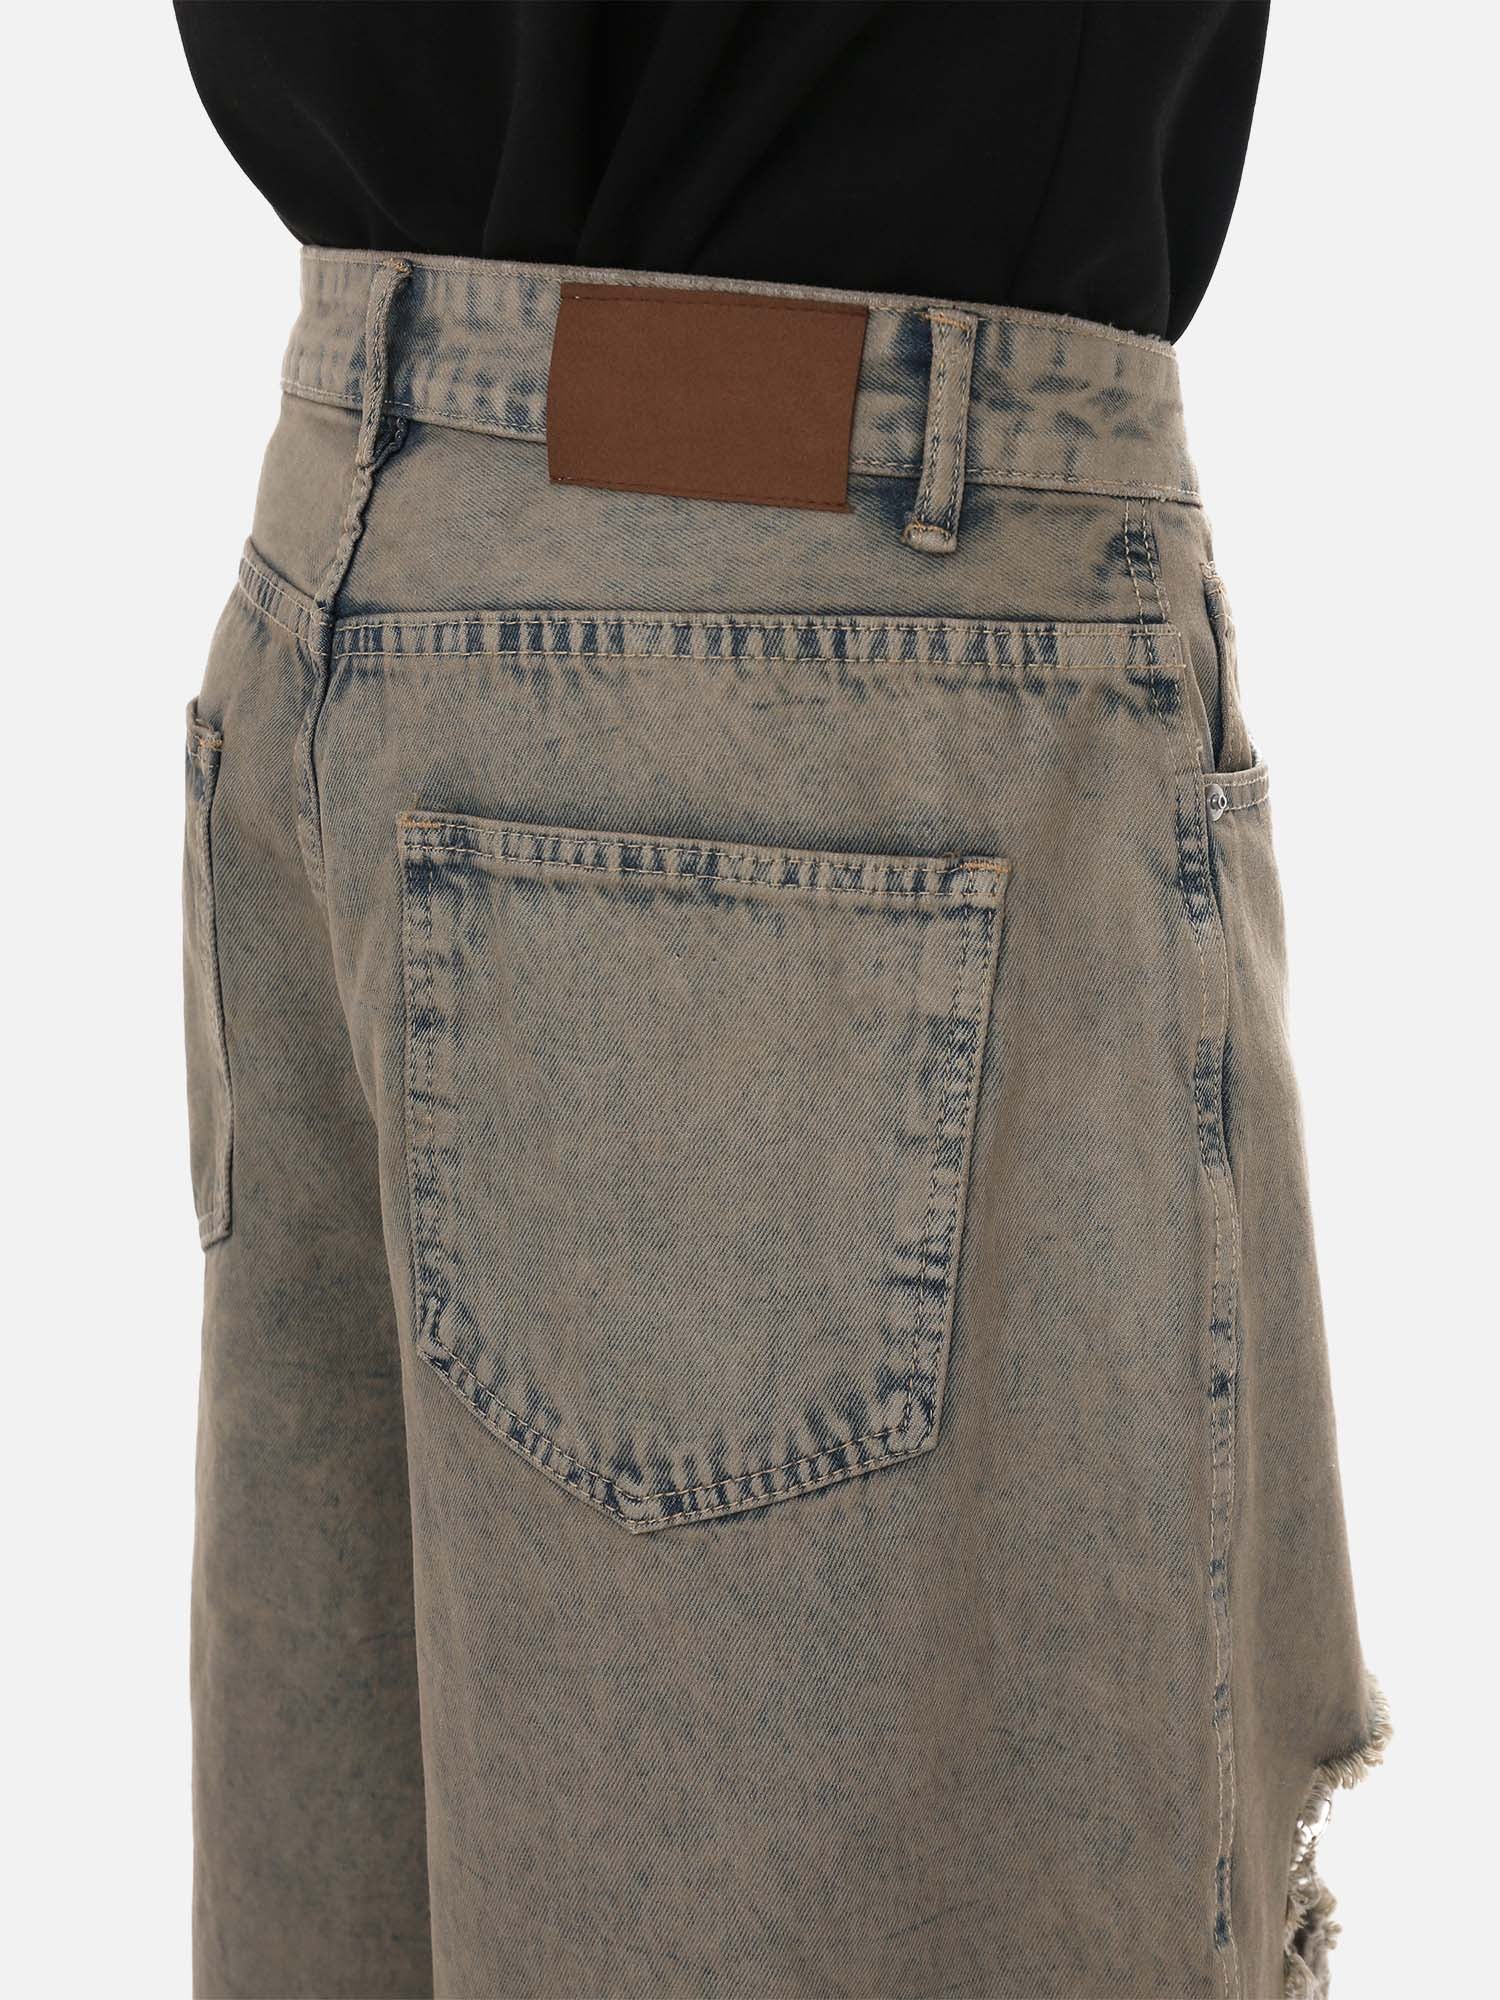 Thesupermade Wasteland Style Ripped And Dirty Denim Jort